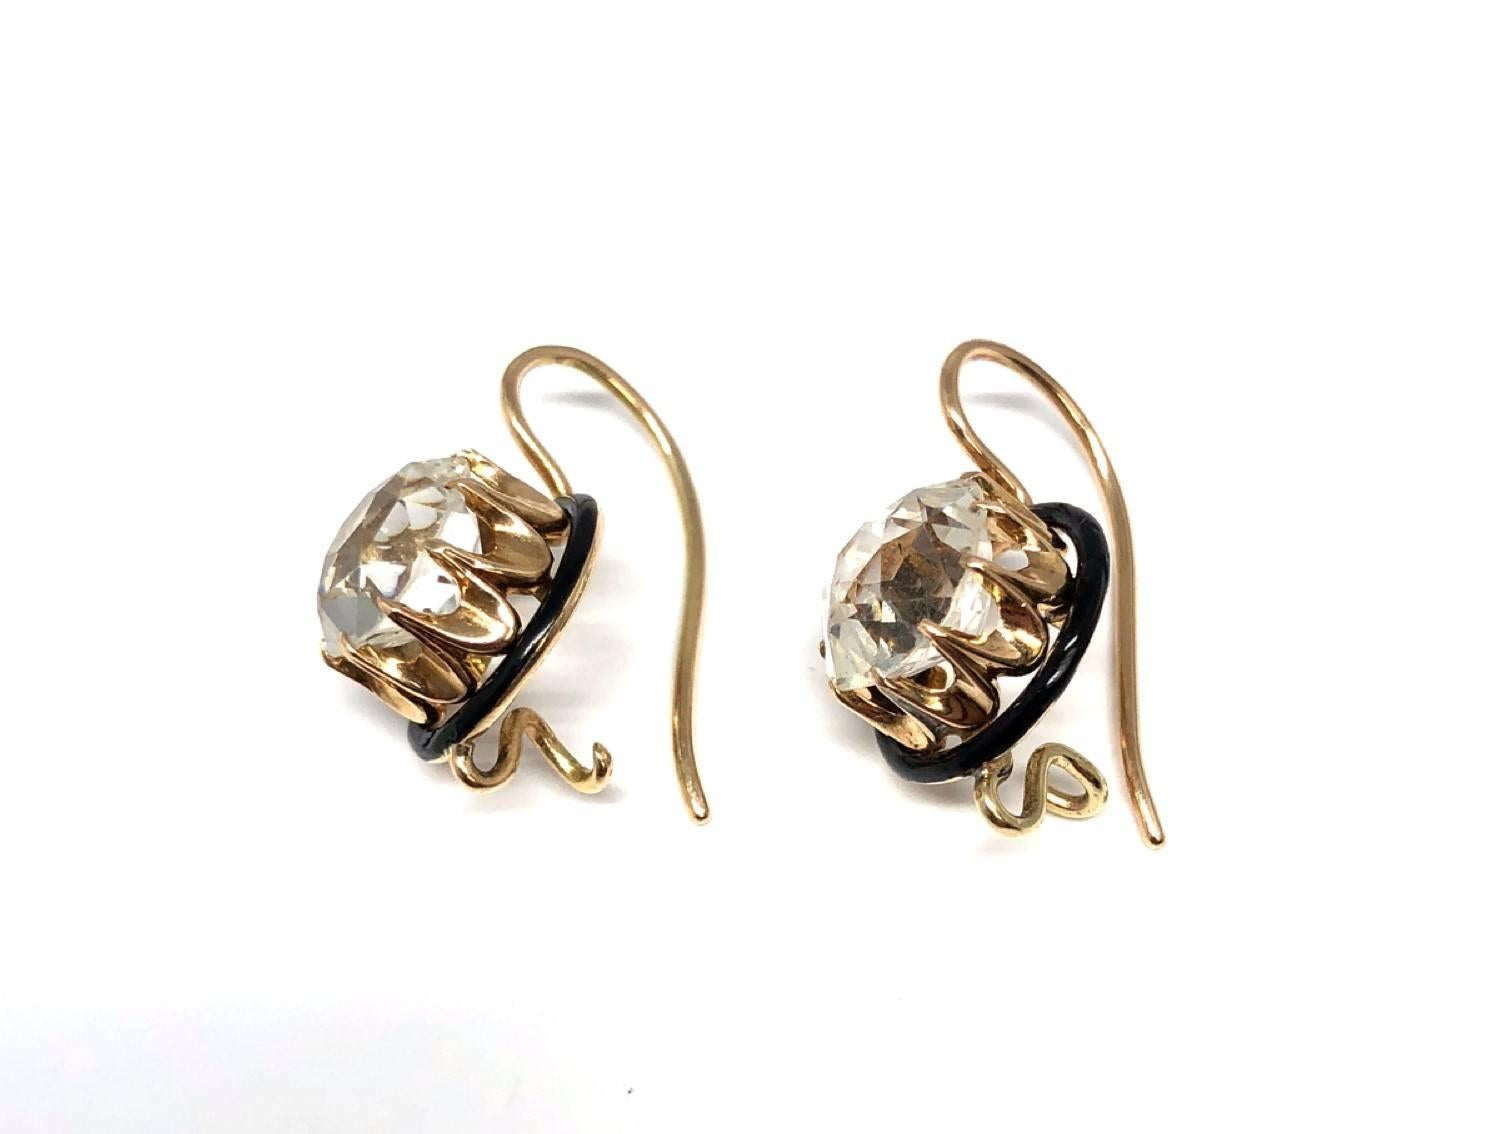 White Topaz stone framed in black enamel and gold. Thin golden wiring encases the stone, beautifully worked around it and framed in black enamel. Classic and simple design creates an elegant set of earrings.